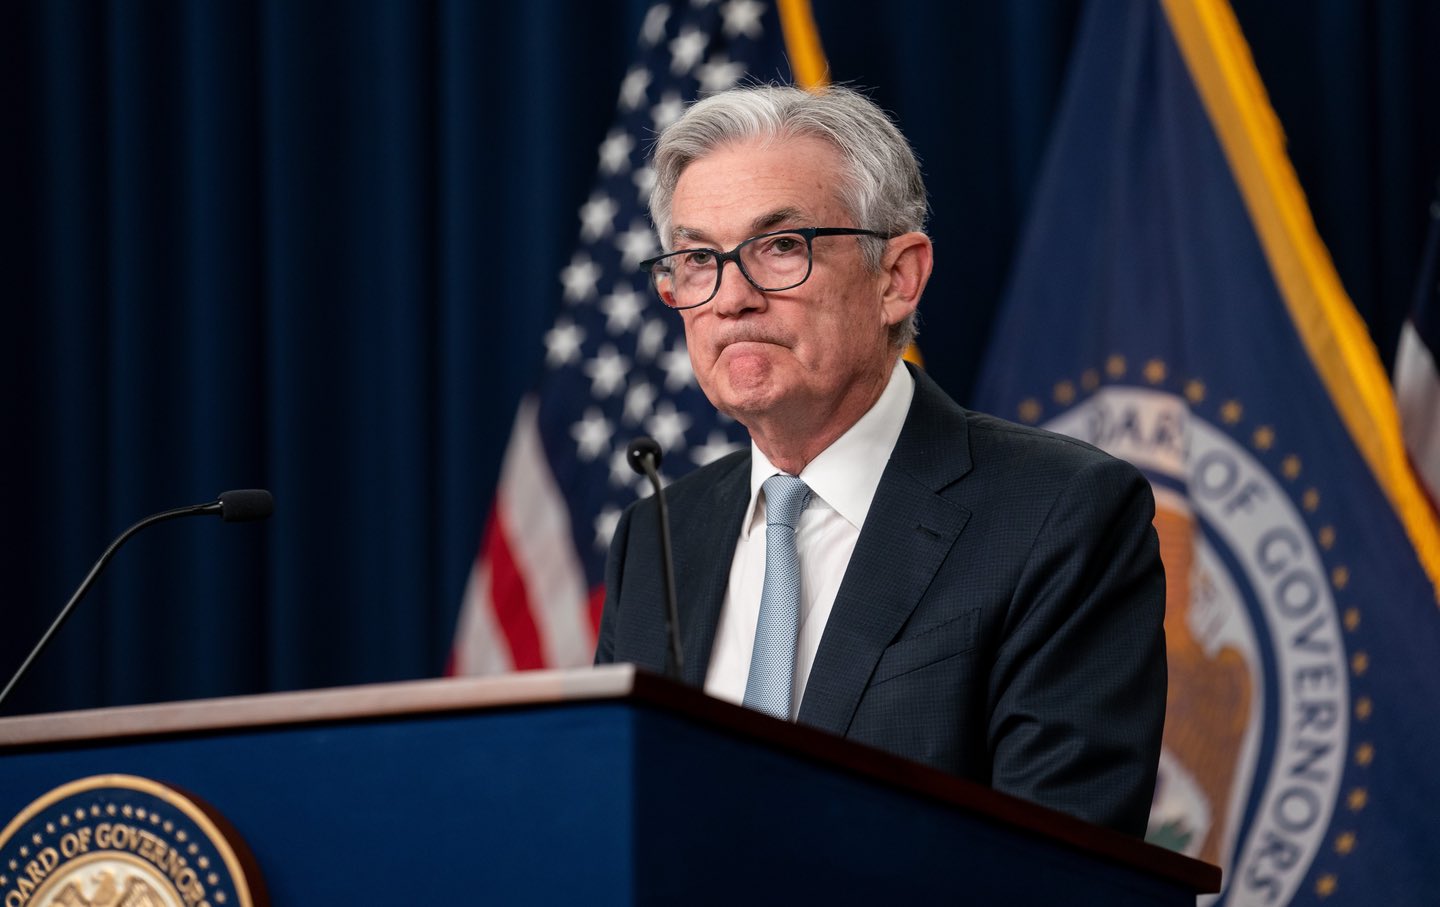 Jerome Powell at a press conference on Nov. 2.